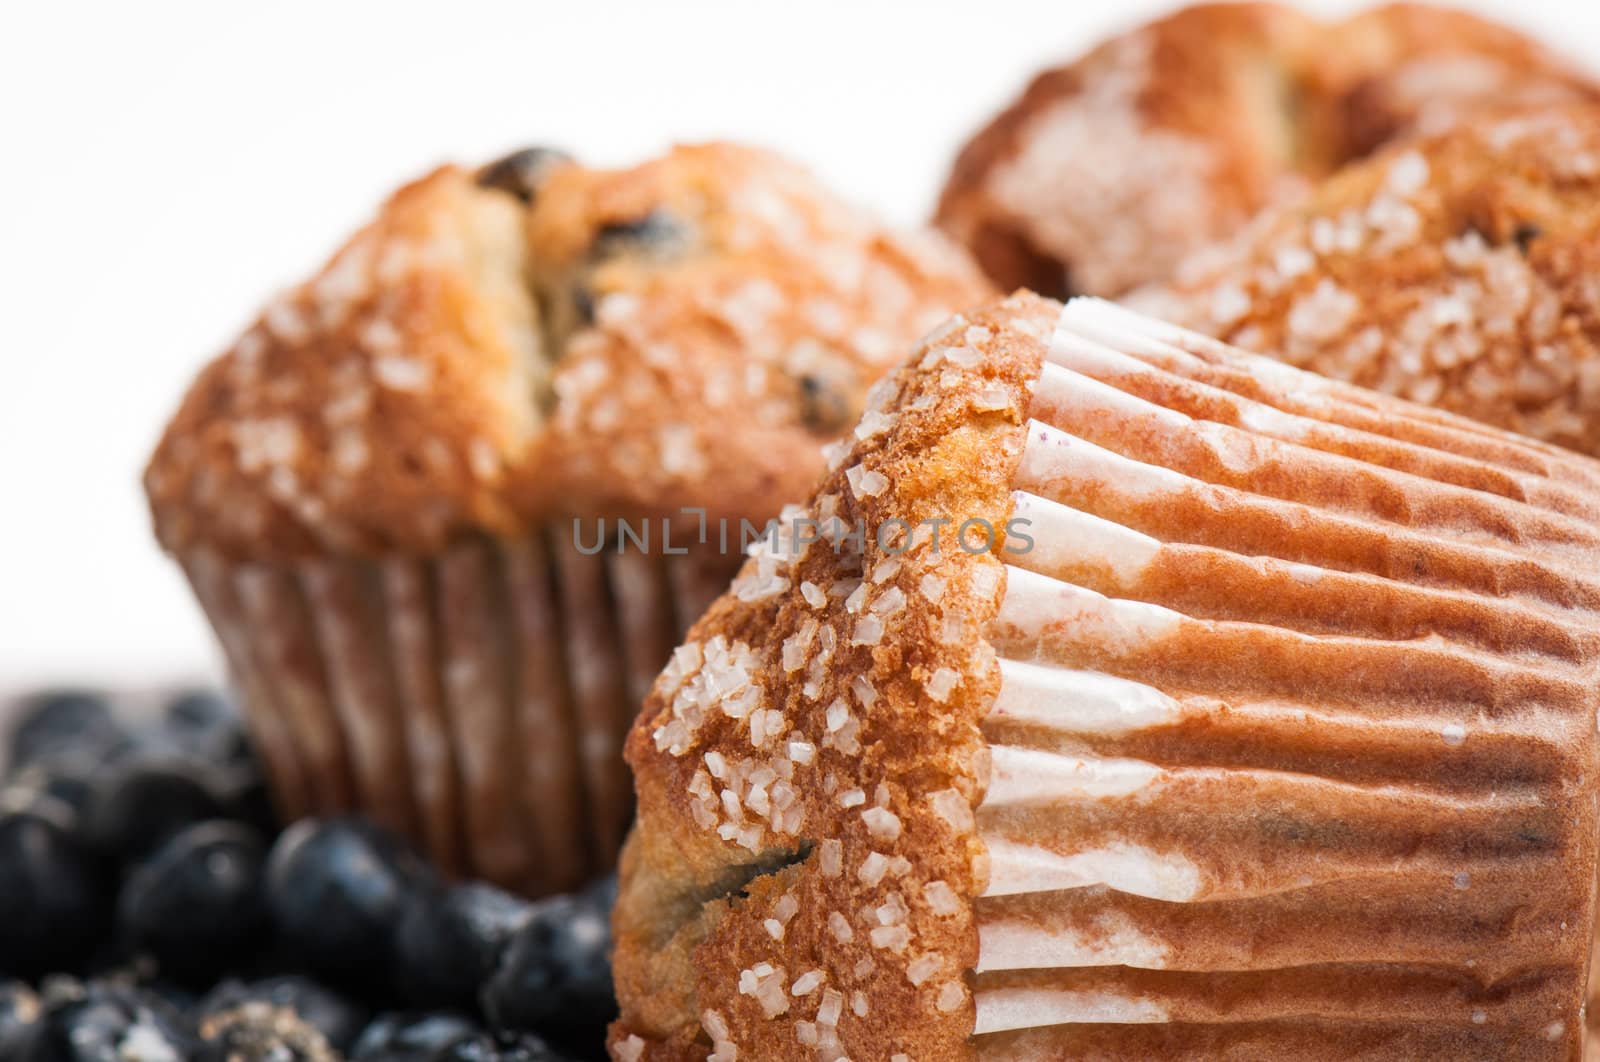 Blueberry Muffin on White Background